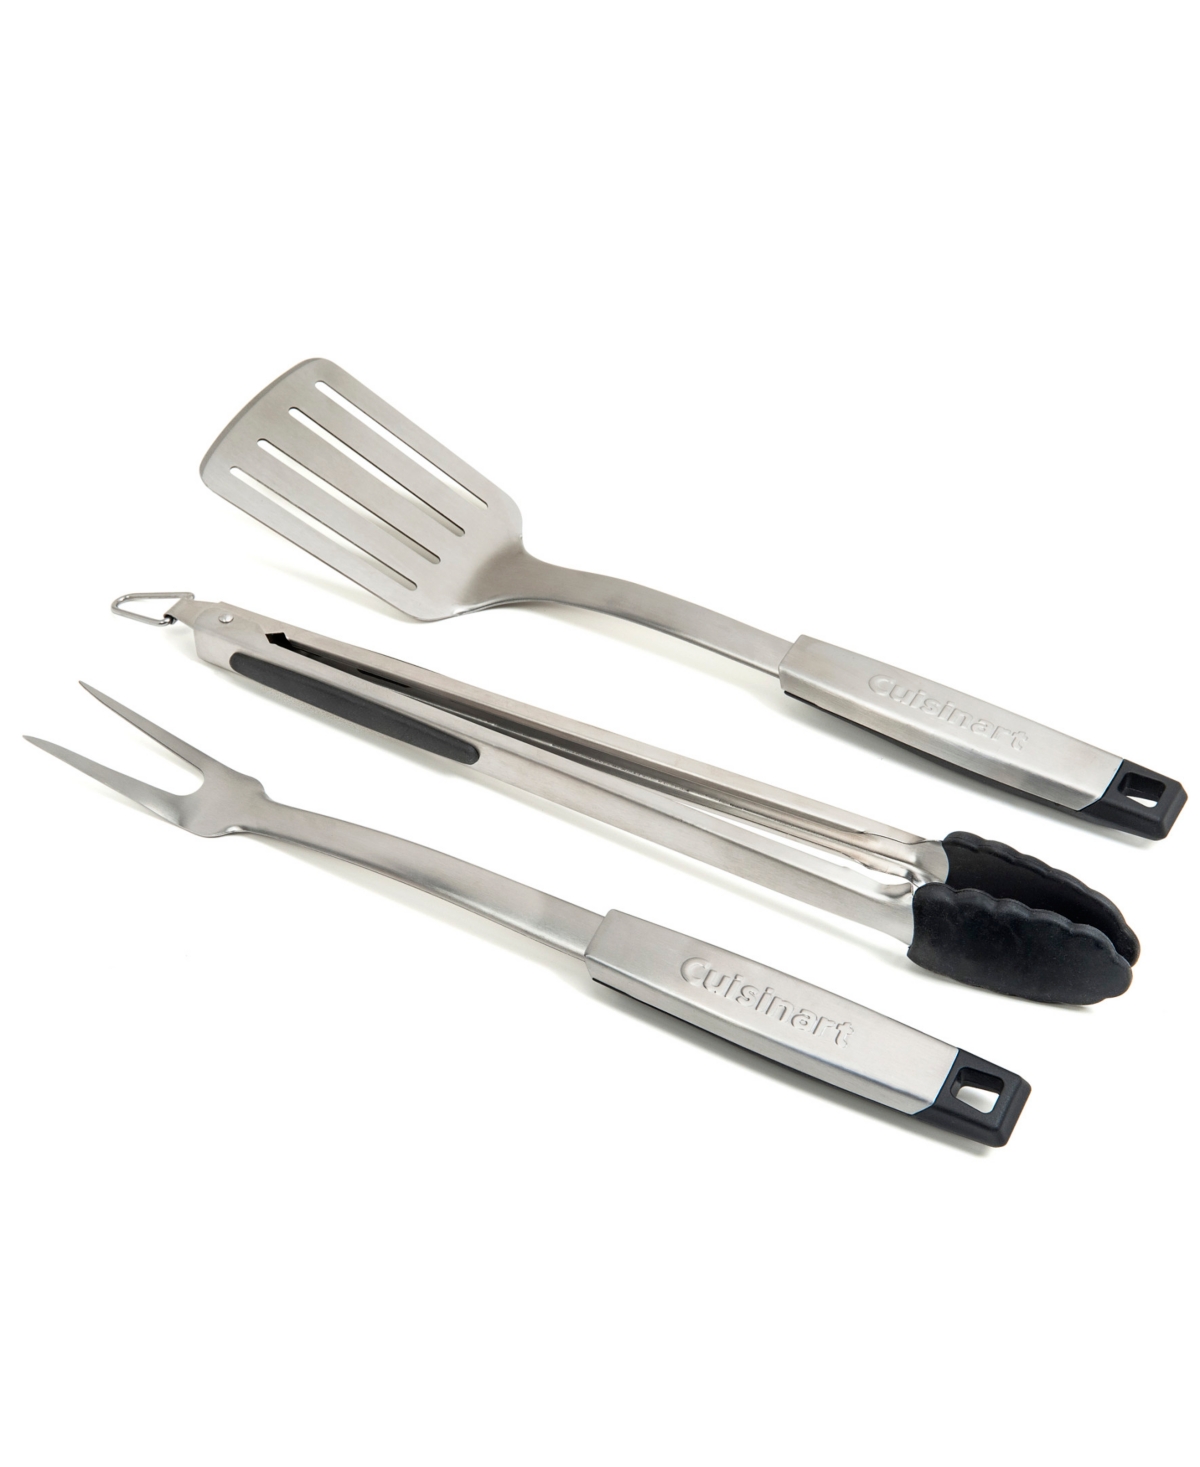 Cuisinart Professional Grill Tool Set 3-piece In Stainless Steel